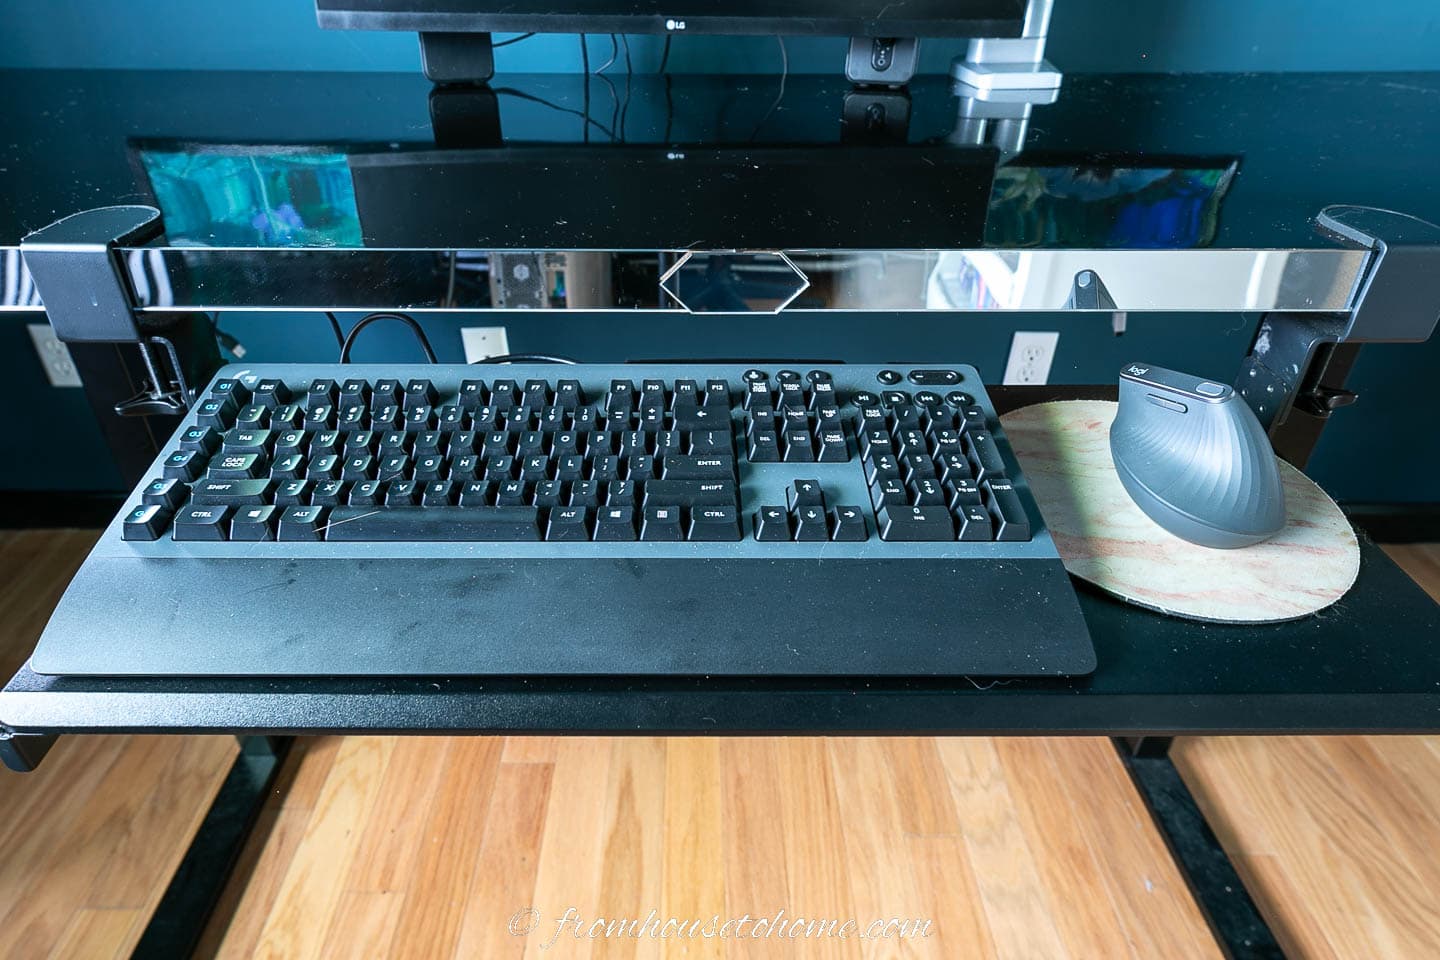 A wireless keyboard and mouse on a keyboard tray